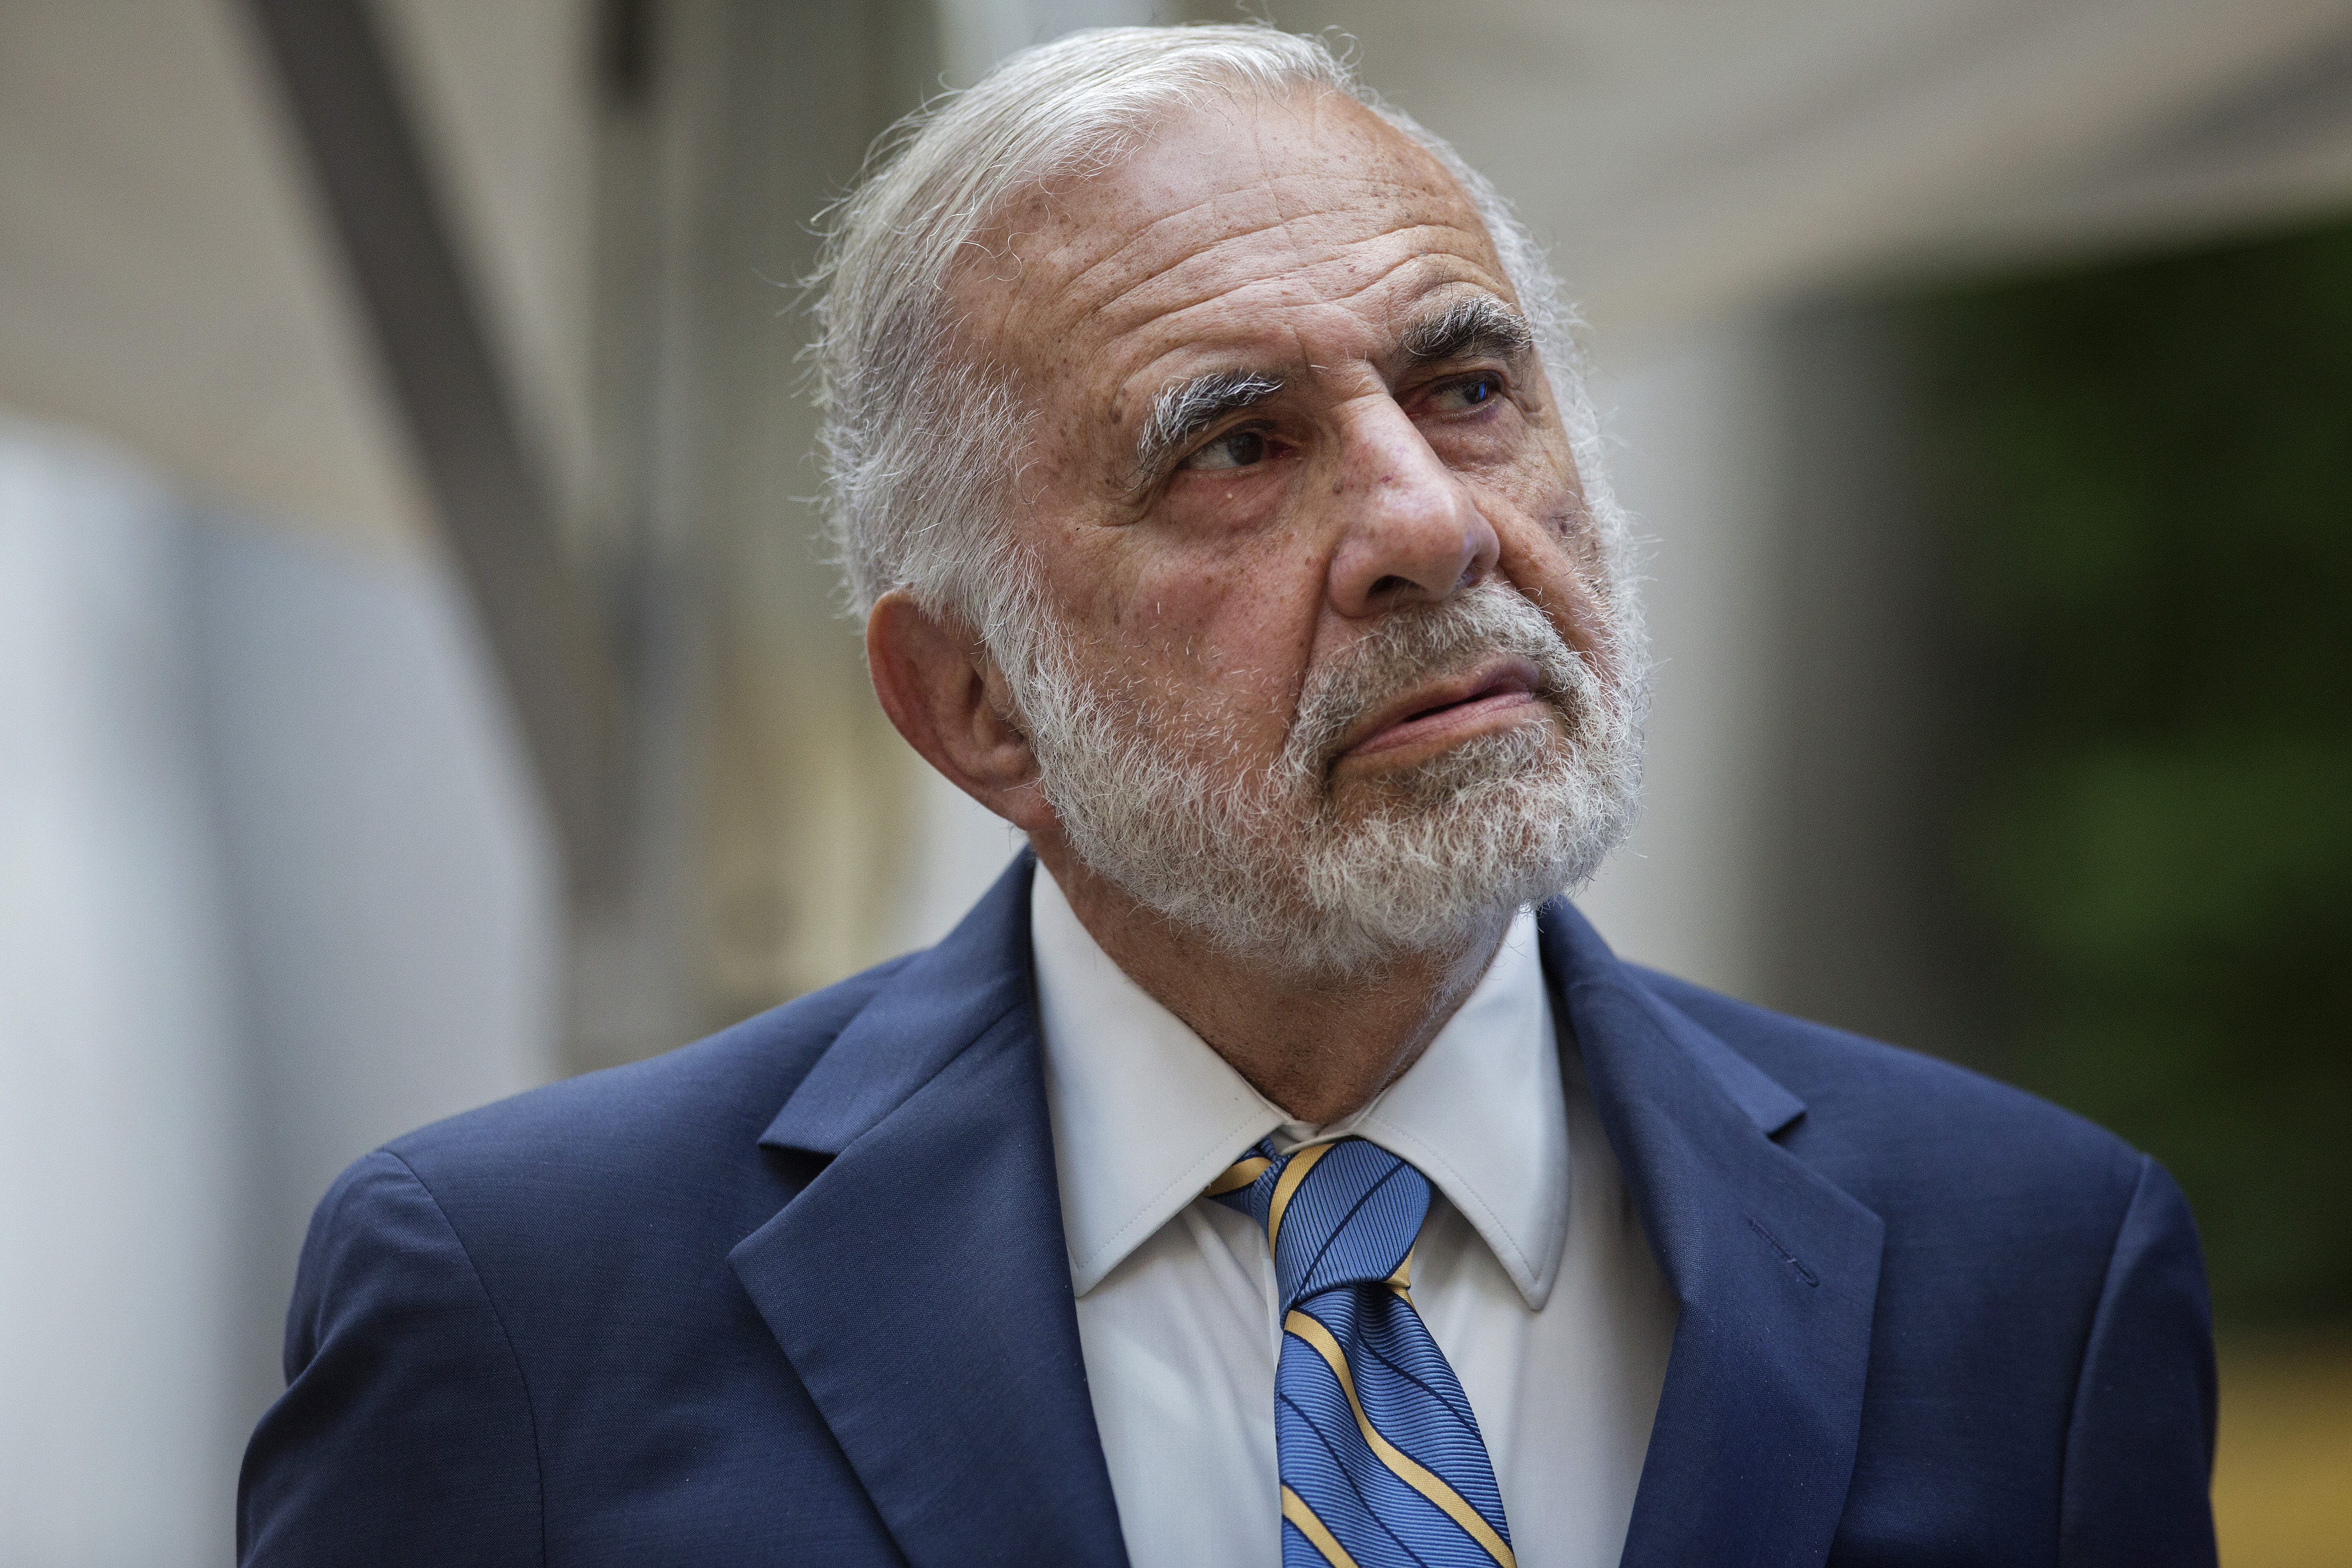 Carl Icahn attends a charity event in New York on May 19, 2015. (Victor J. Blue–Bloomberg/Getty Images)